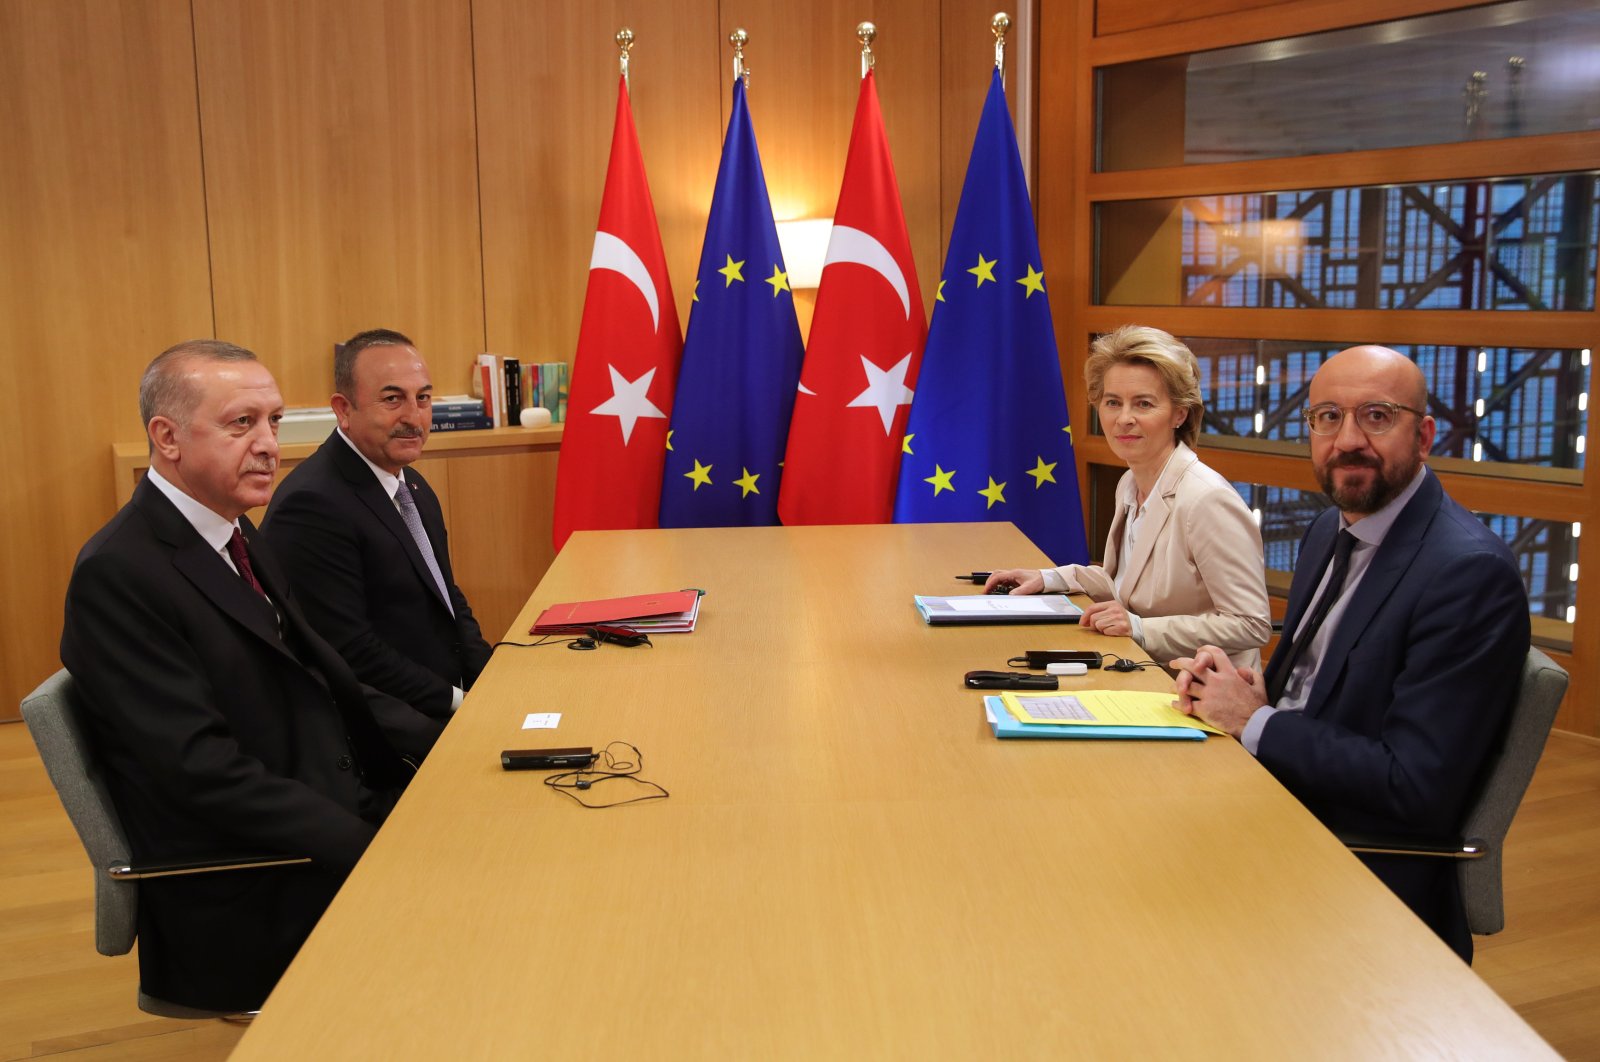 President Recep Tayyip Erdoğan (left) and Foreign Minister Mevlüt Çavuşoğlu (second left) at a meeting with Ursula von der Leyen (second right) and Charles Michel, President of European Council (right), Monday, March 9, 2020. (AA Photo) 